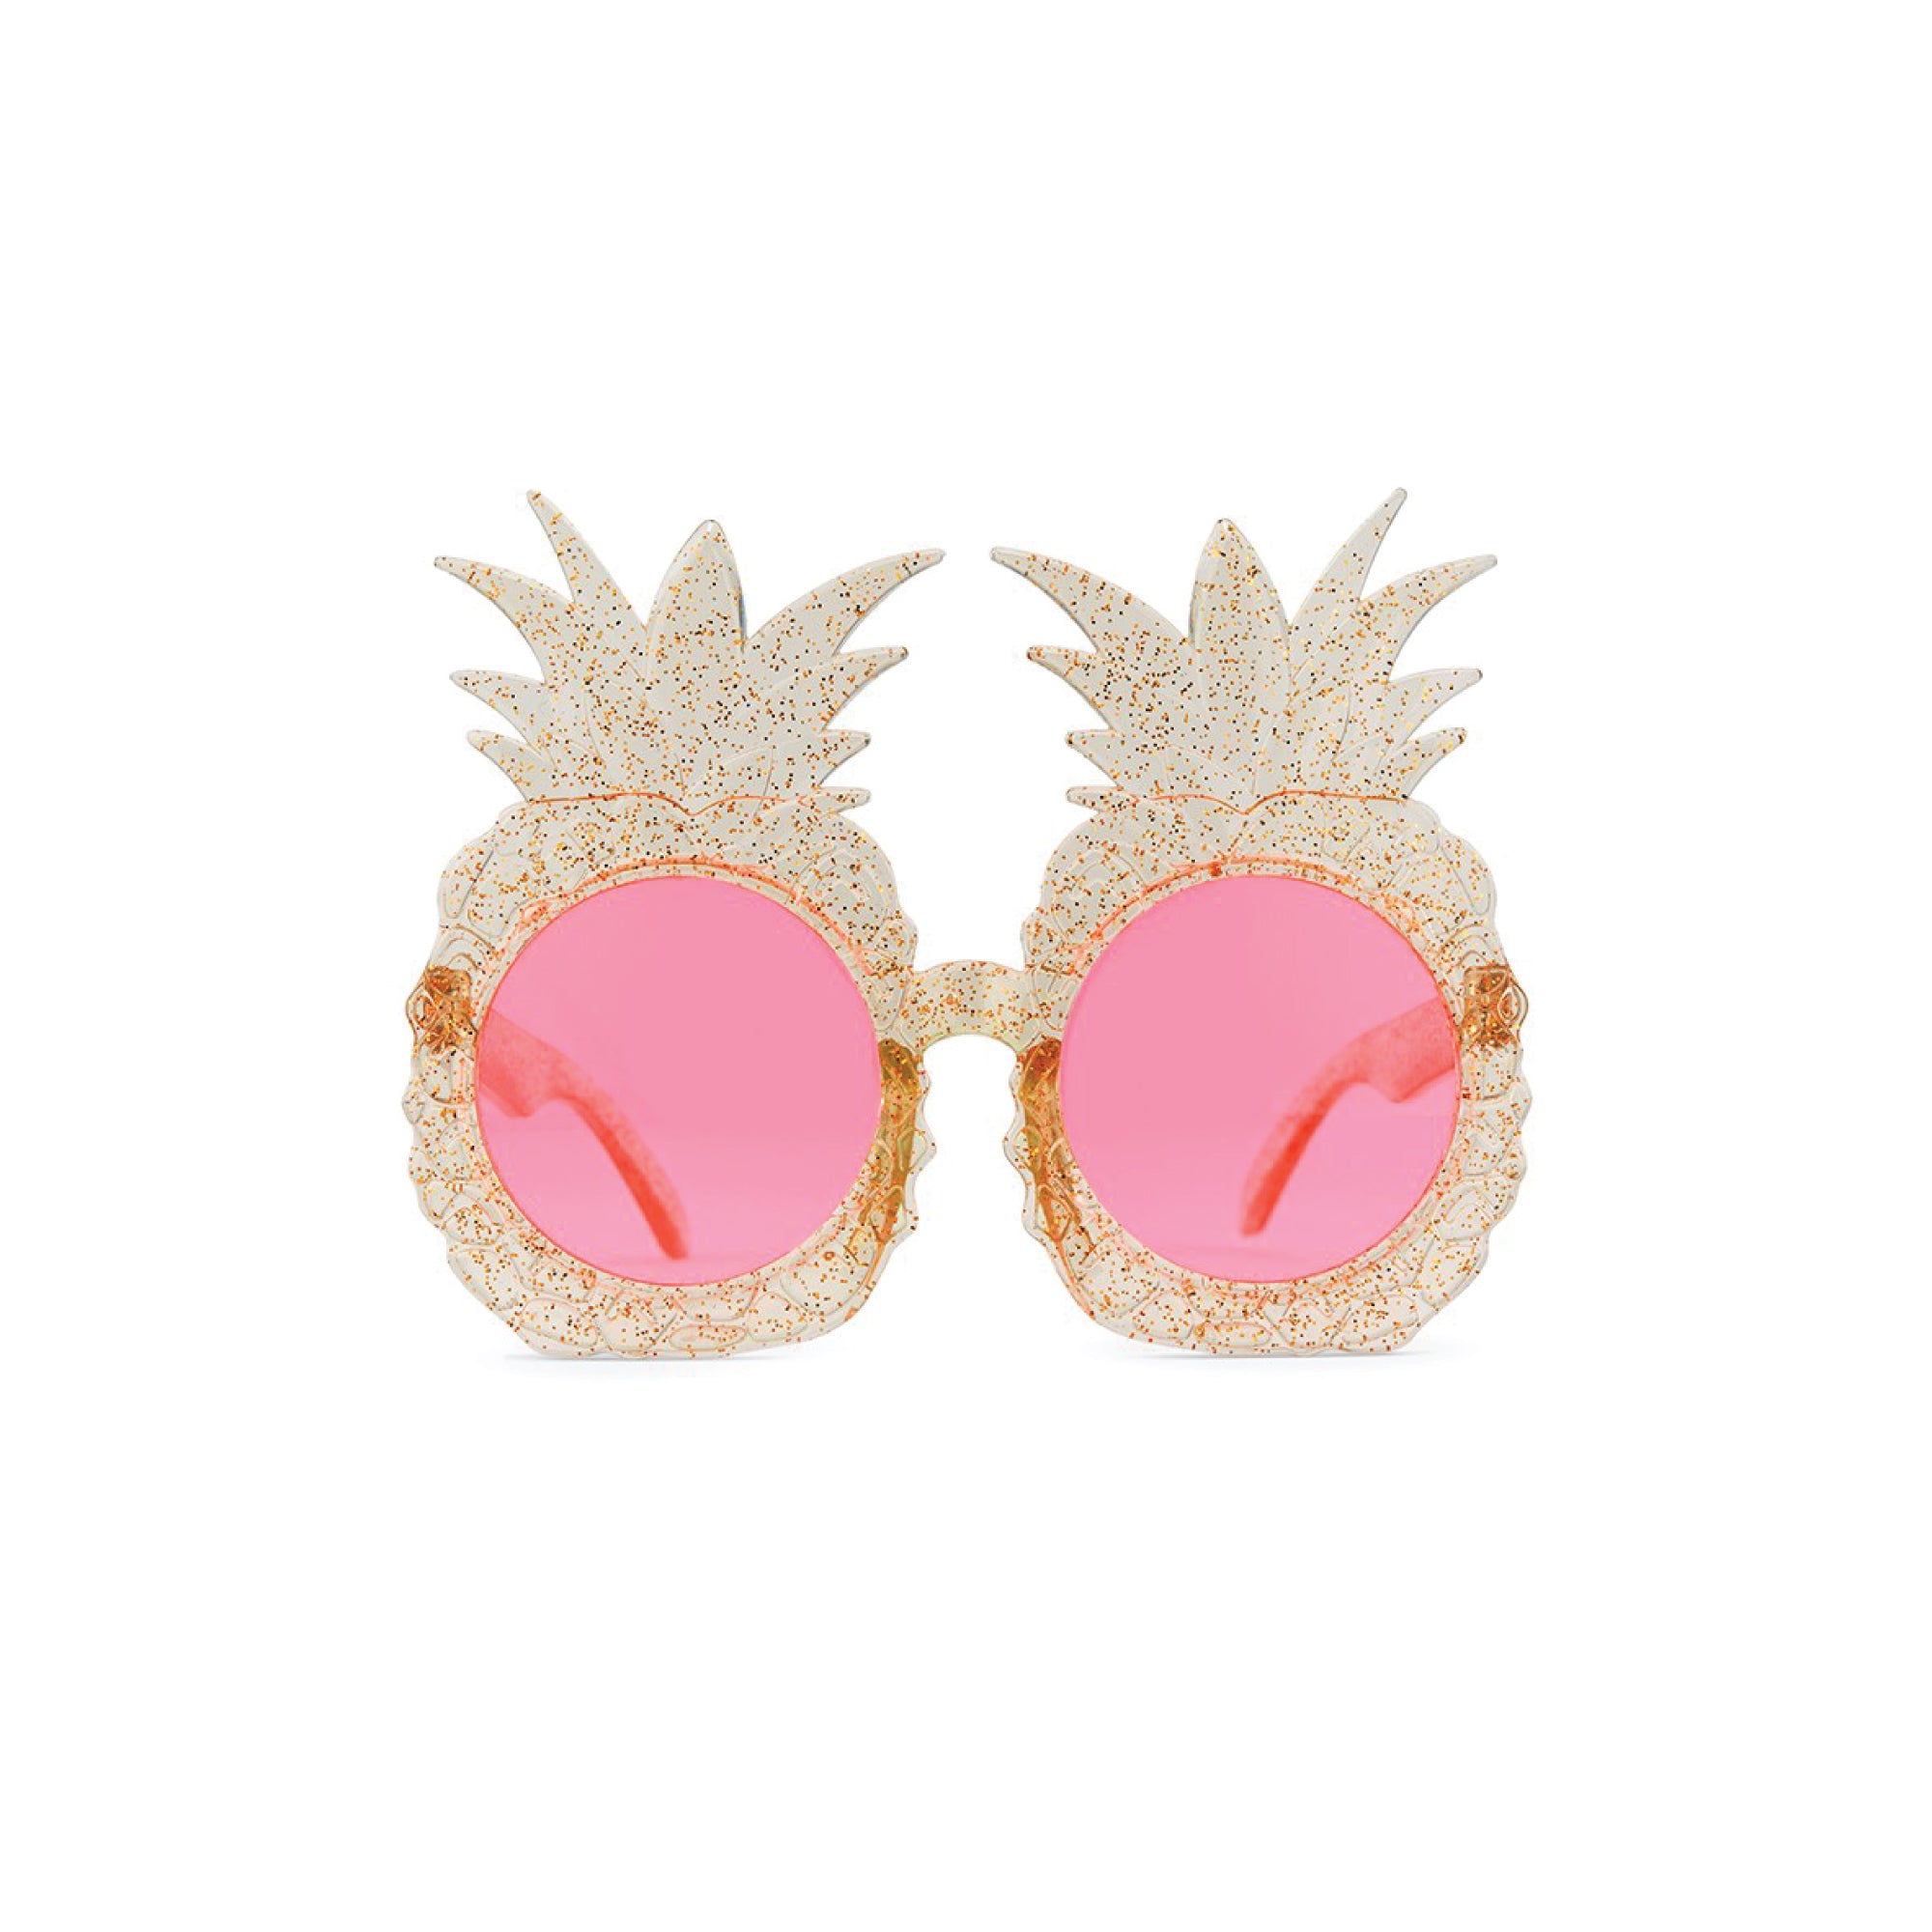 Gold Glitter Pineapple Plastic Sunglasses | The Party Darling